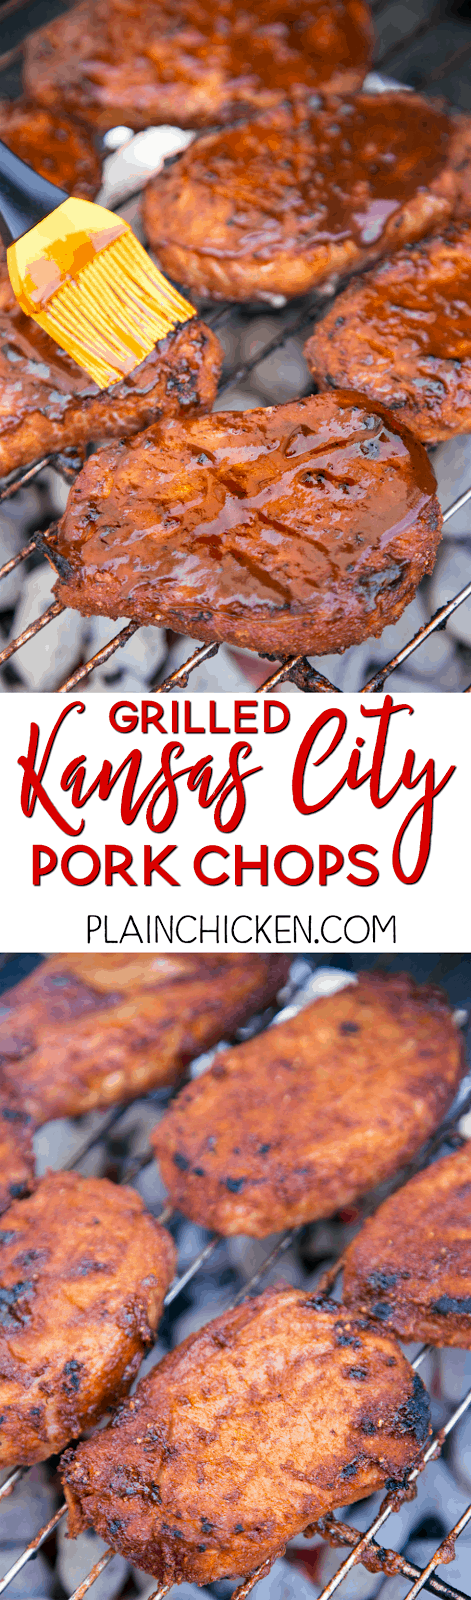 Grilled Kansas City Pork Chops - THE BEST pork chops! Season pork chops with an easy dry rub and refrigerate until ready to grill. Brush with your favorite BBQ sauce before removing from grill! Pork chops, brown sugar, paprika, garlic powder, onion powder, chili powder, salt and pepper. We make these pork chops at least once a month. We LOVE this easy grilling recipe.